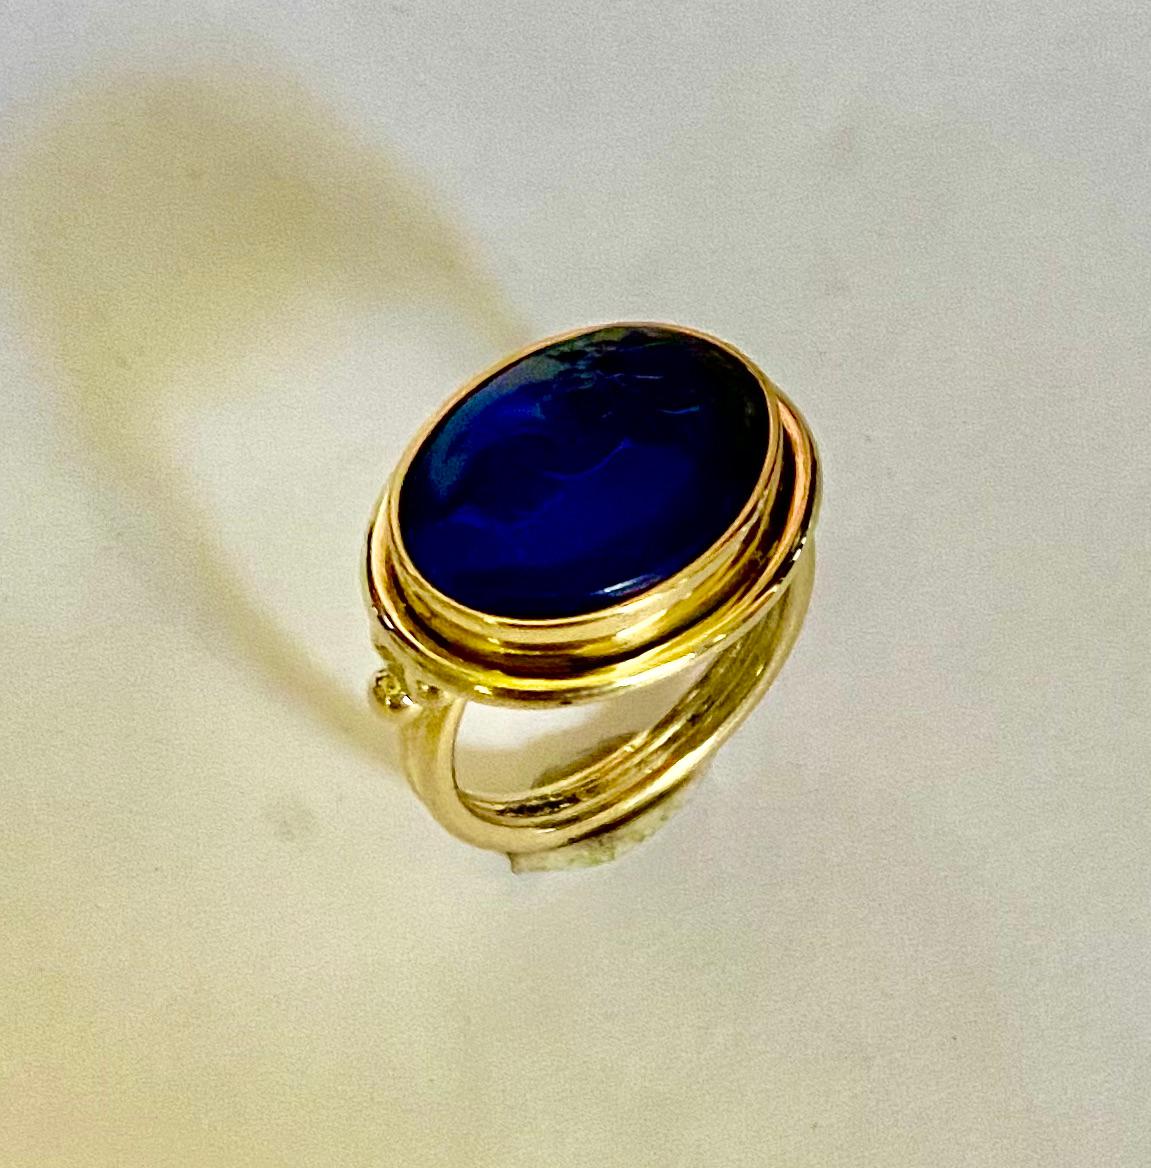 An antique Venetian glass intaglio is featured in this archaic style ring.  The exceptionally well carved cobalt blue intaglio features a charioteer.  The intaglio is set in an 18k yellow gold archaic style ring.  The inspiration for this piece